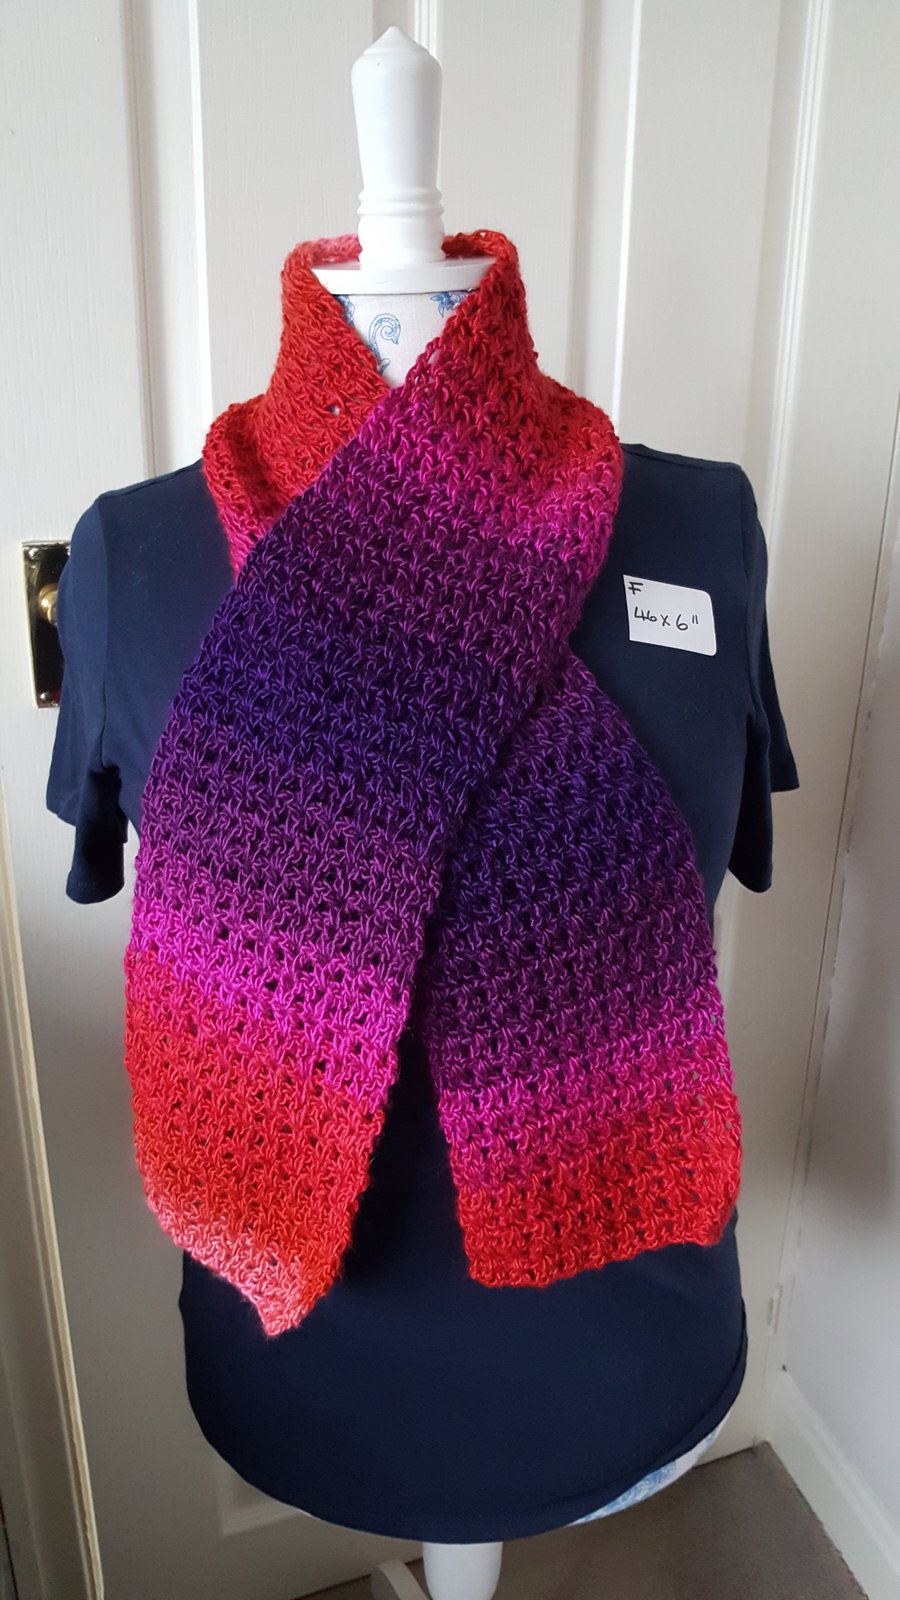 pink and purples lightweight lacy crocheted scarf, 46 x 6 inches